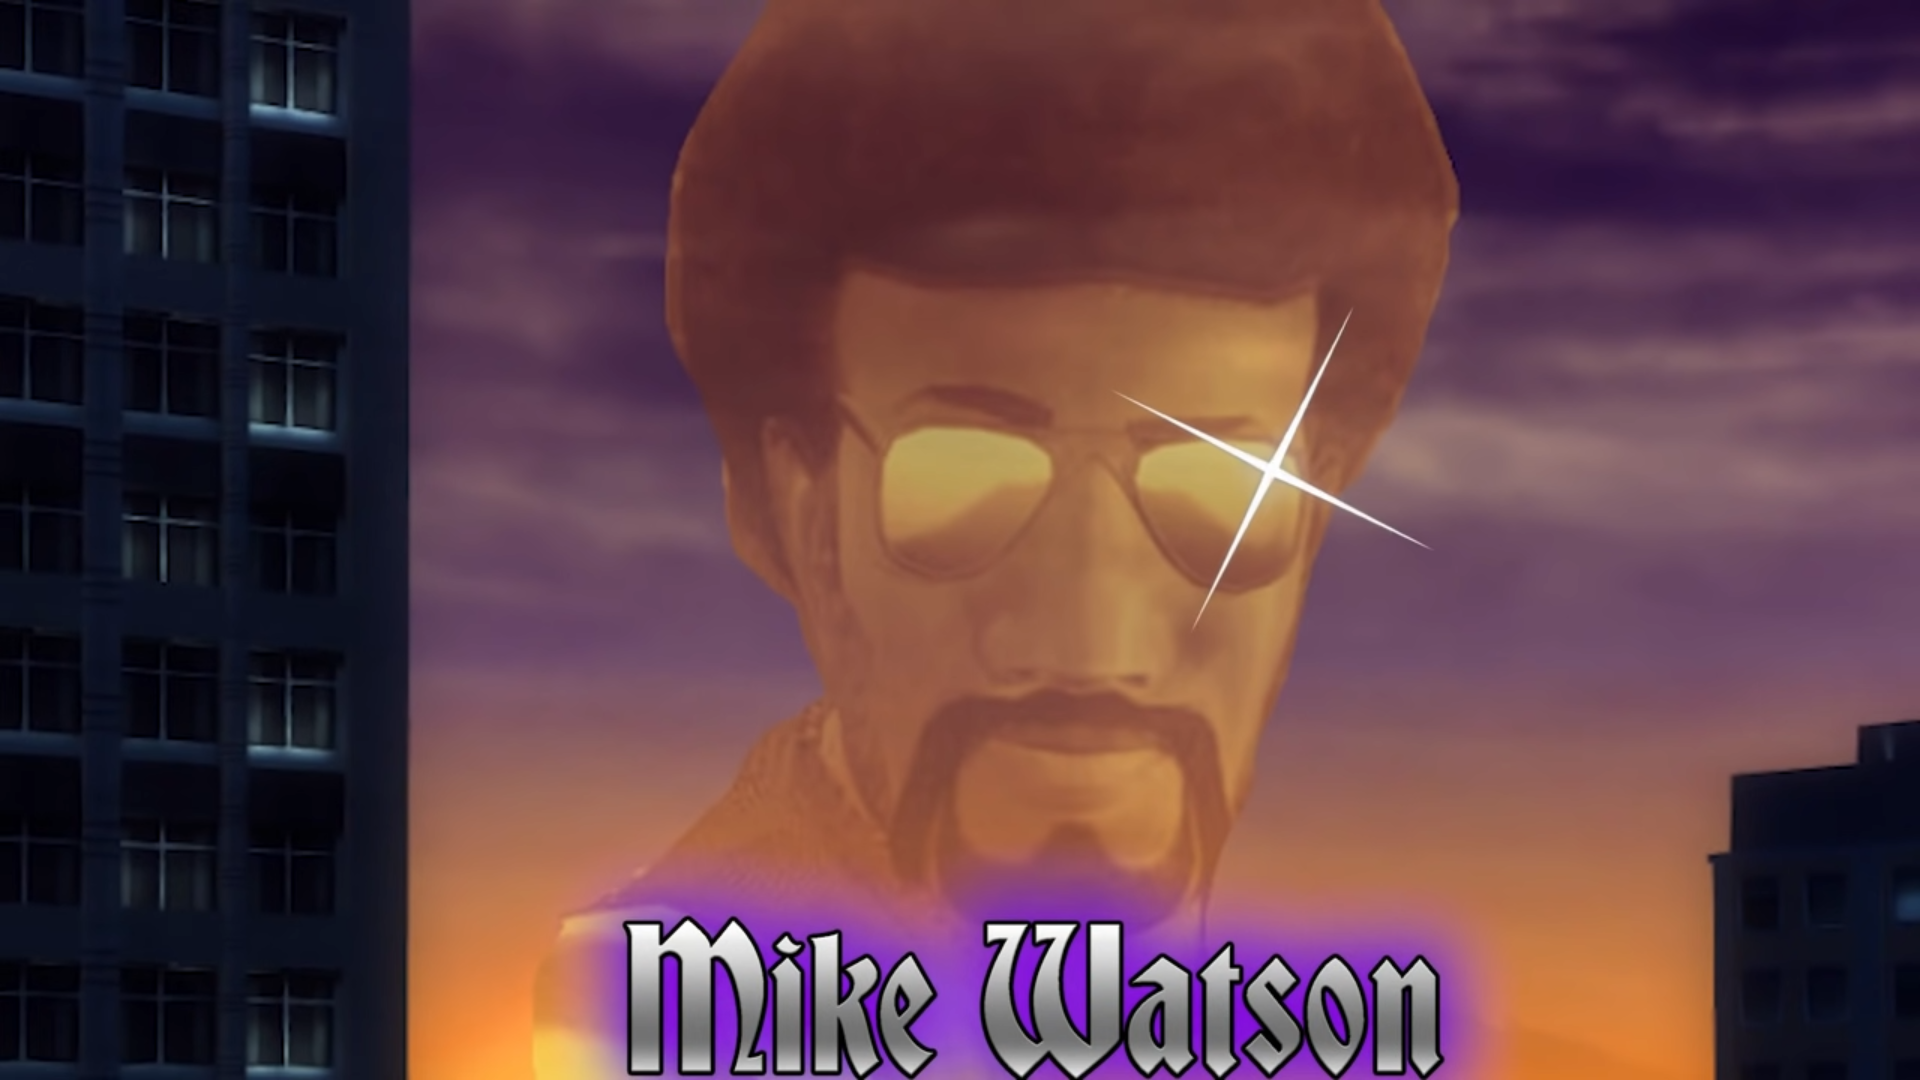 A tribute to the late Saints Row modder, Mike Watson, by Ryan McCabe.